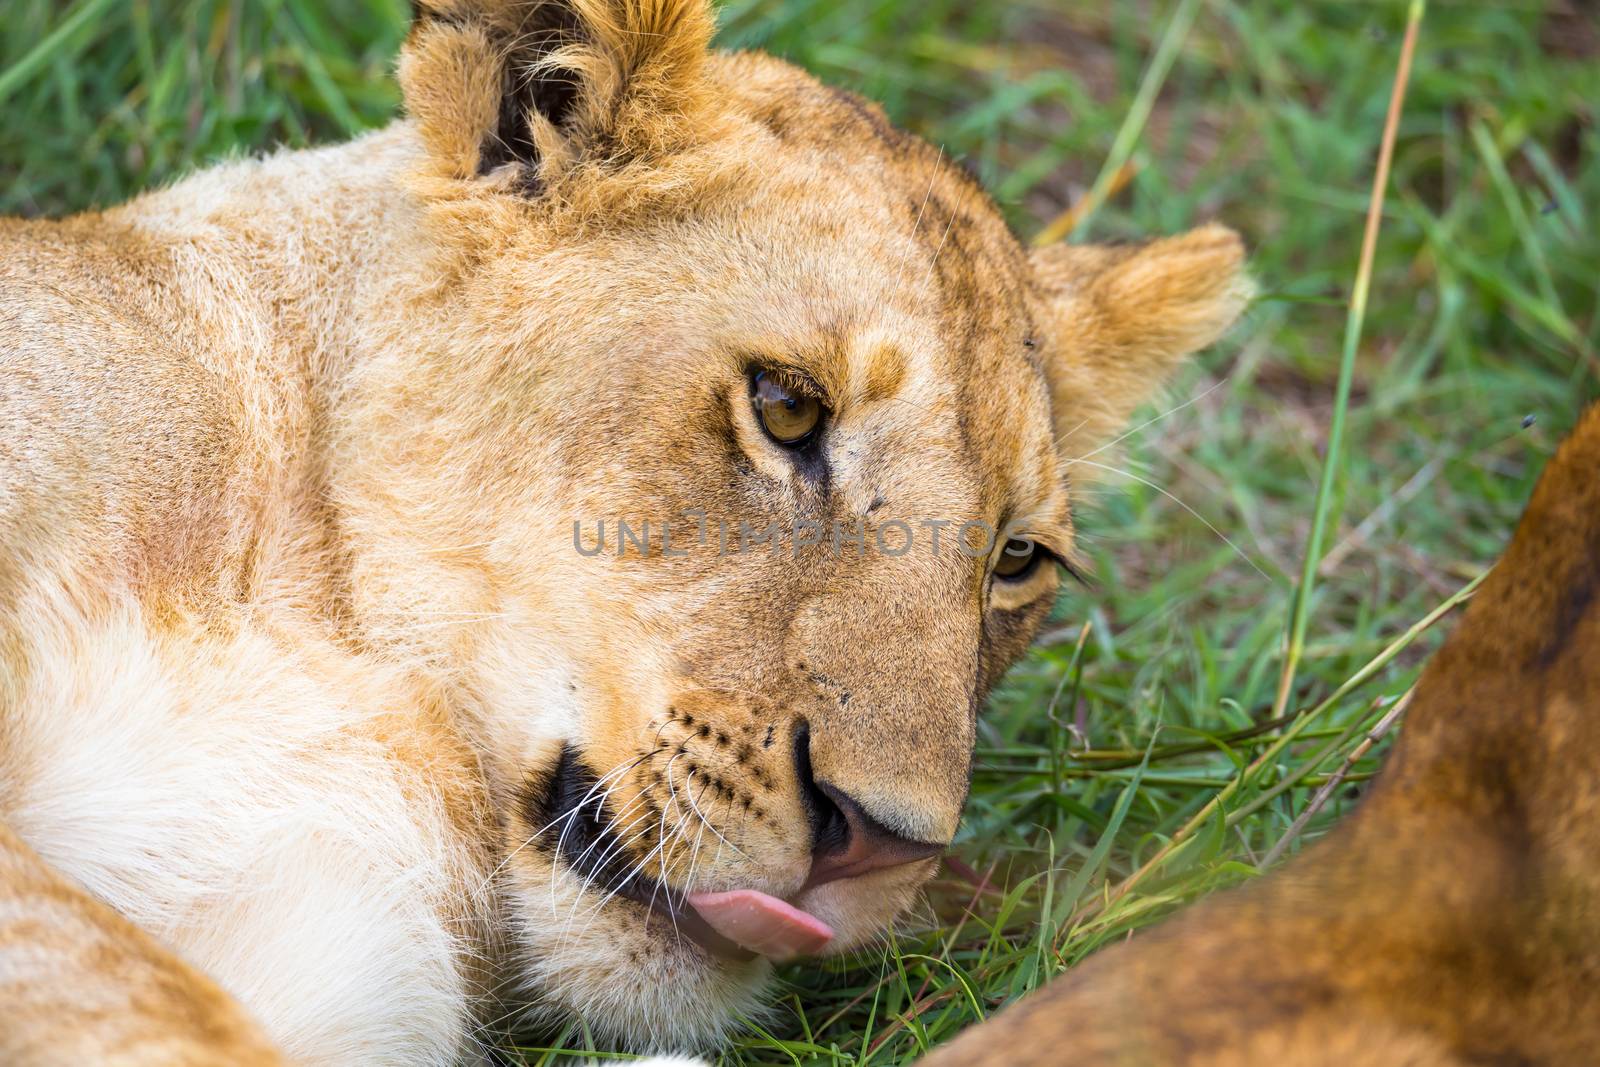 One young lion in close-up, the face of a nearly sleeping lion